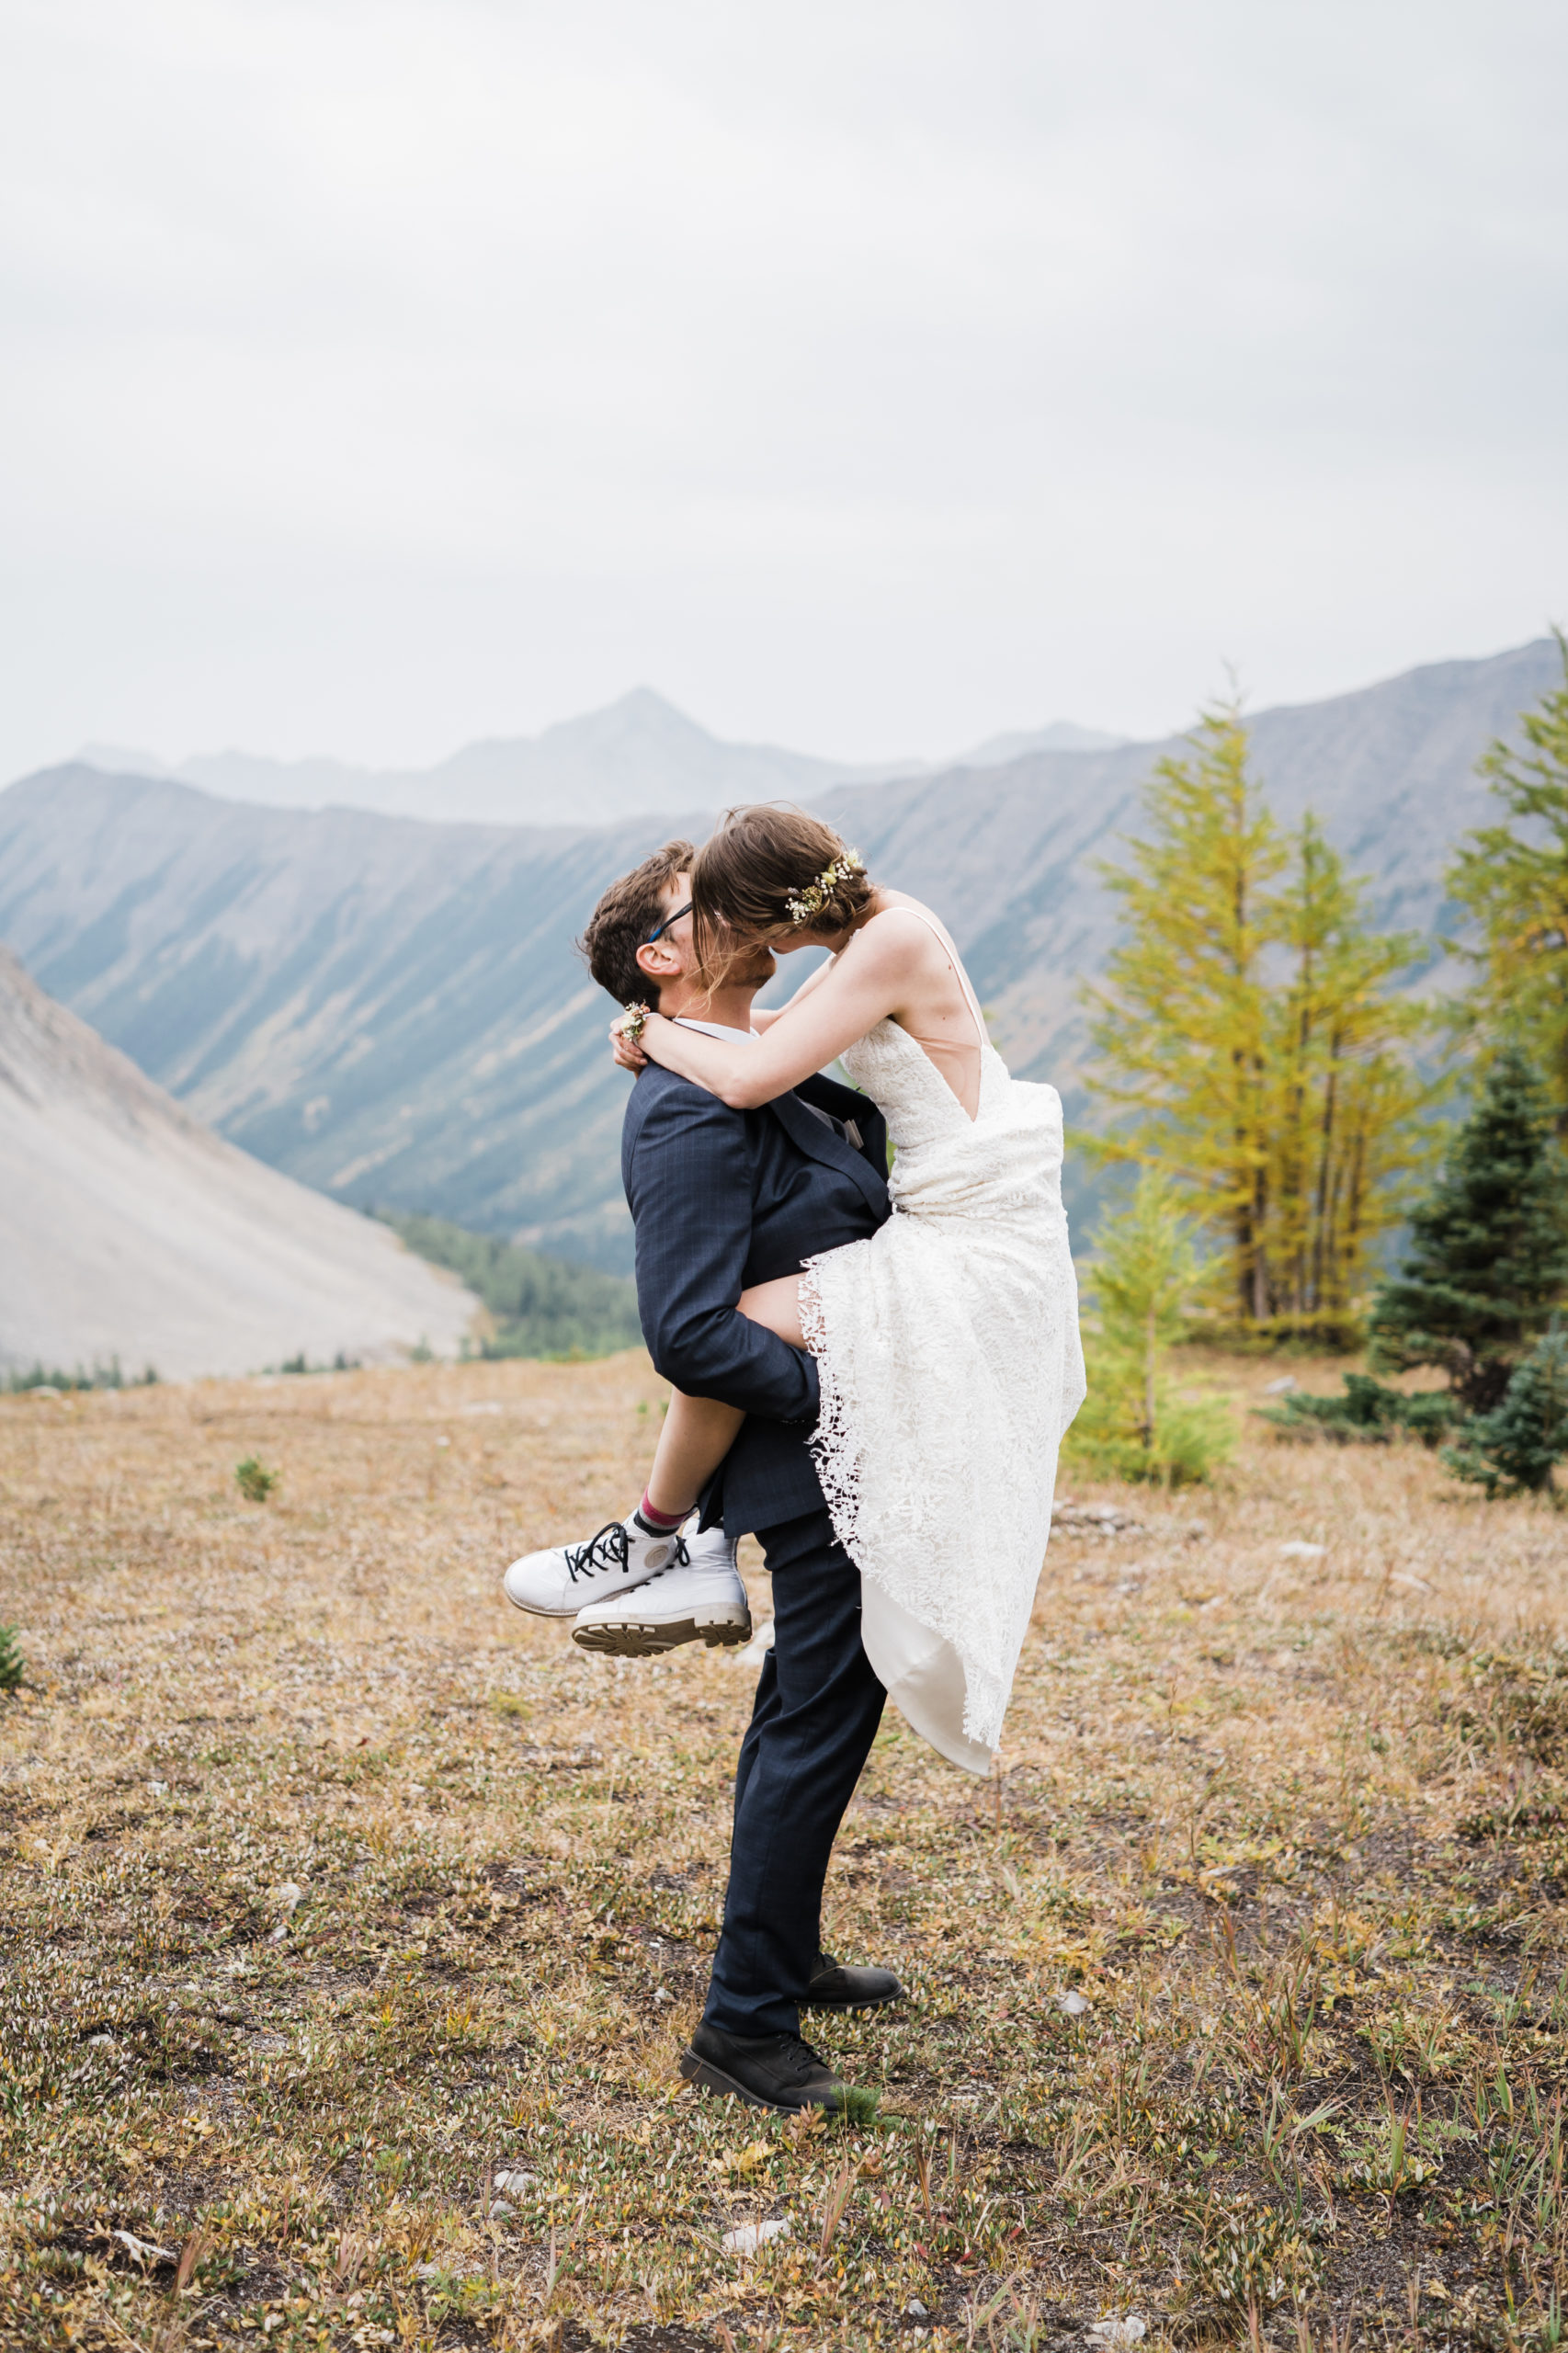 groom is holding bride up with her legs wrapped around him during a fall hiking elopement in alberta